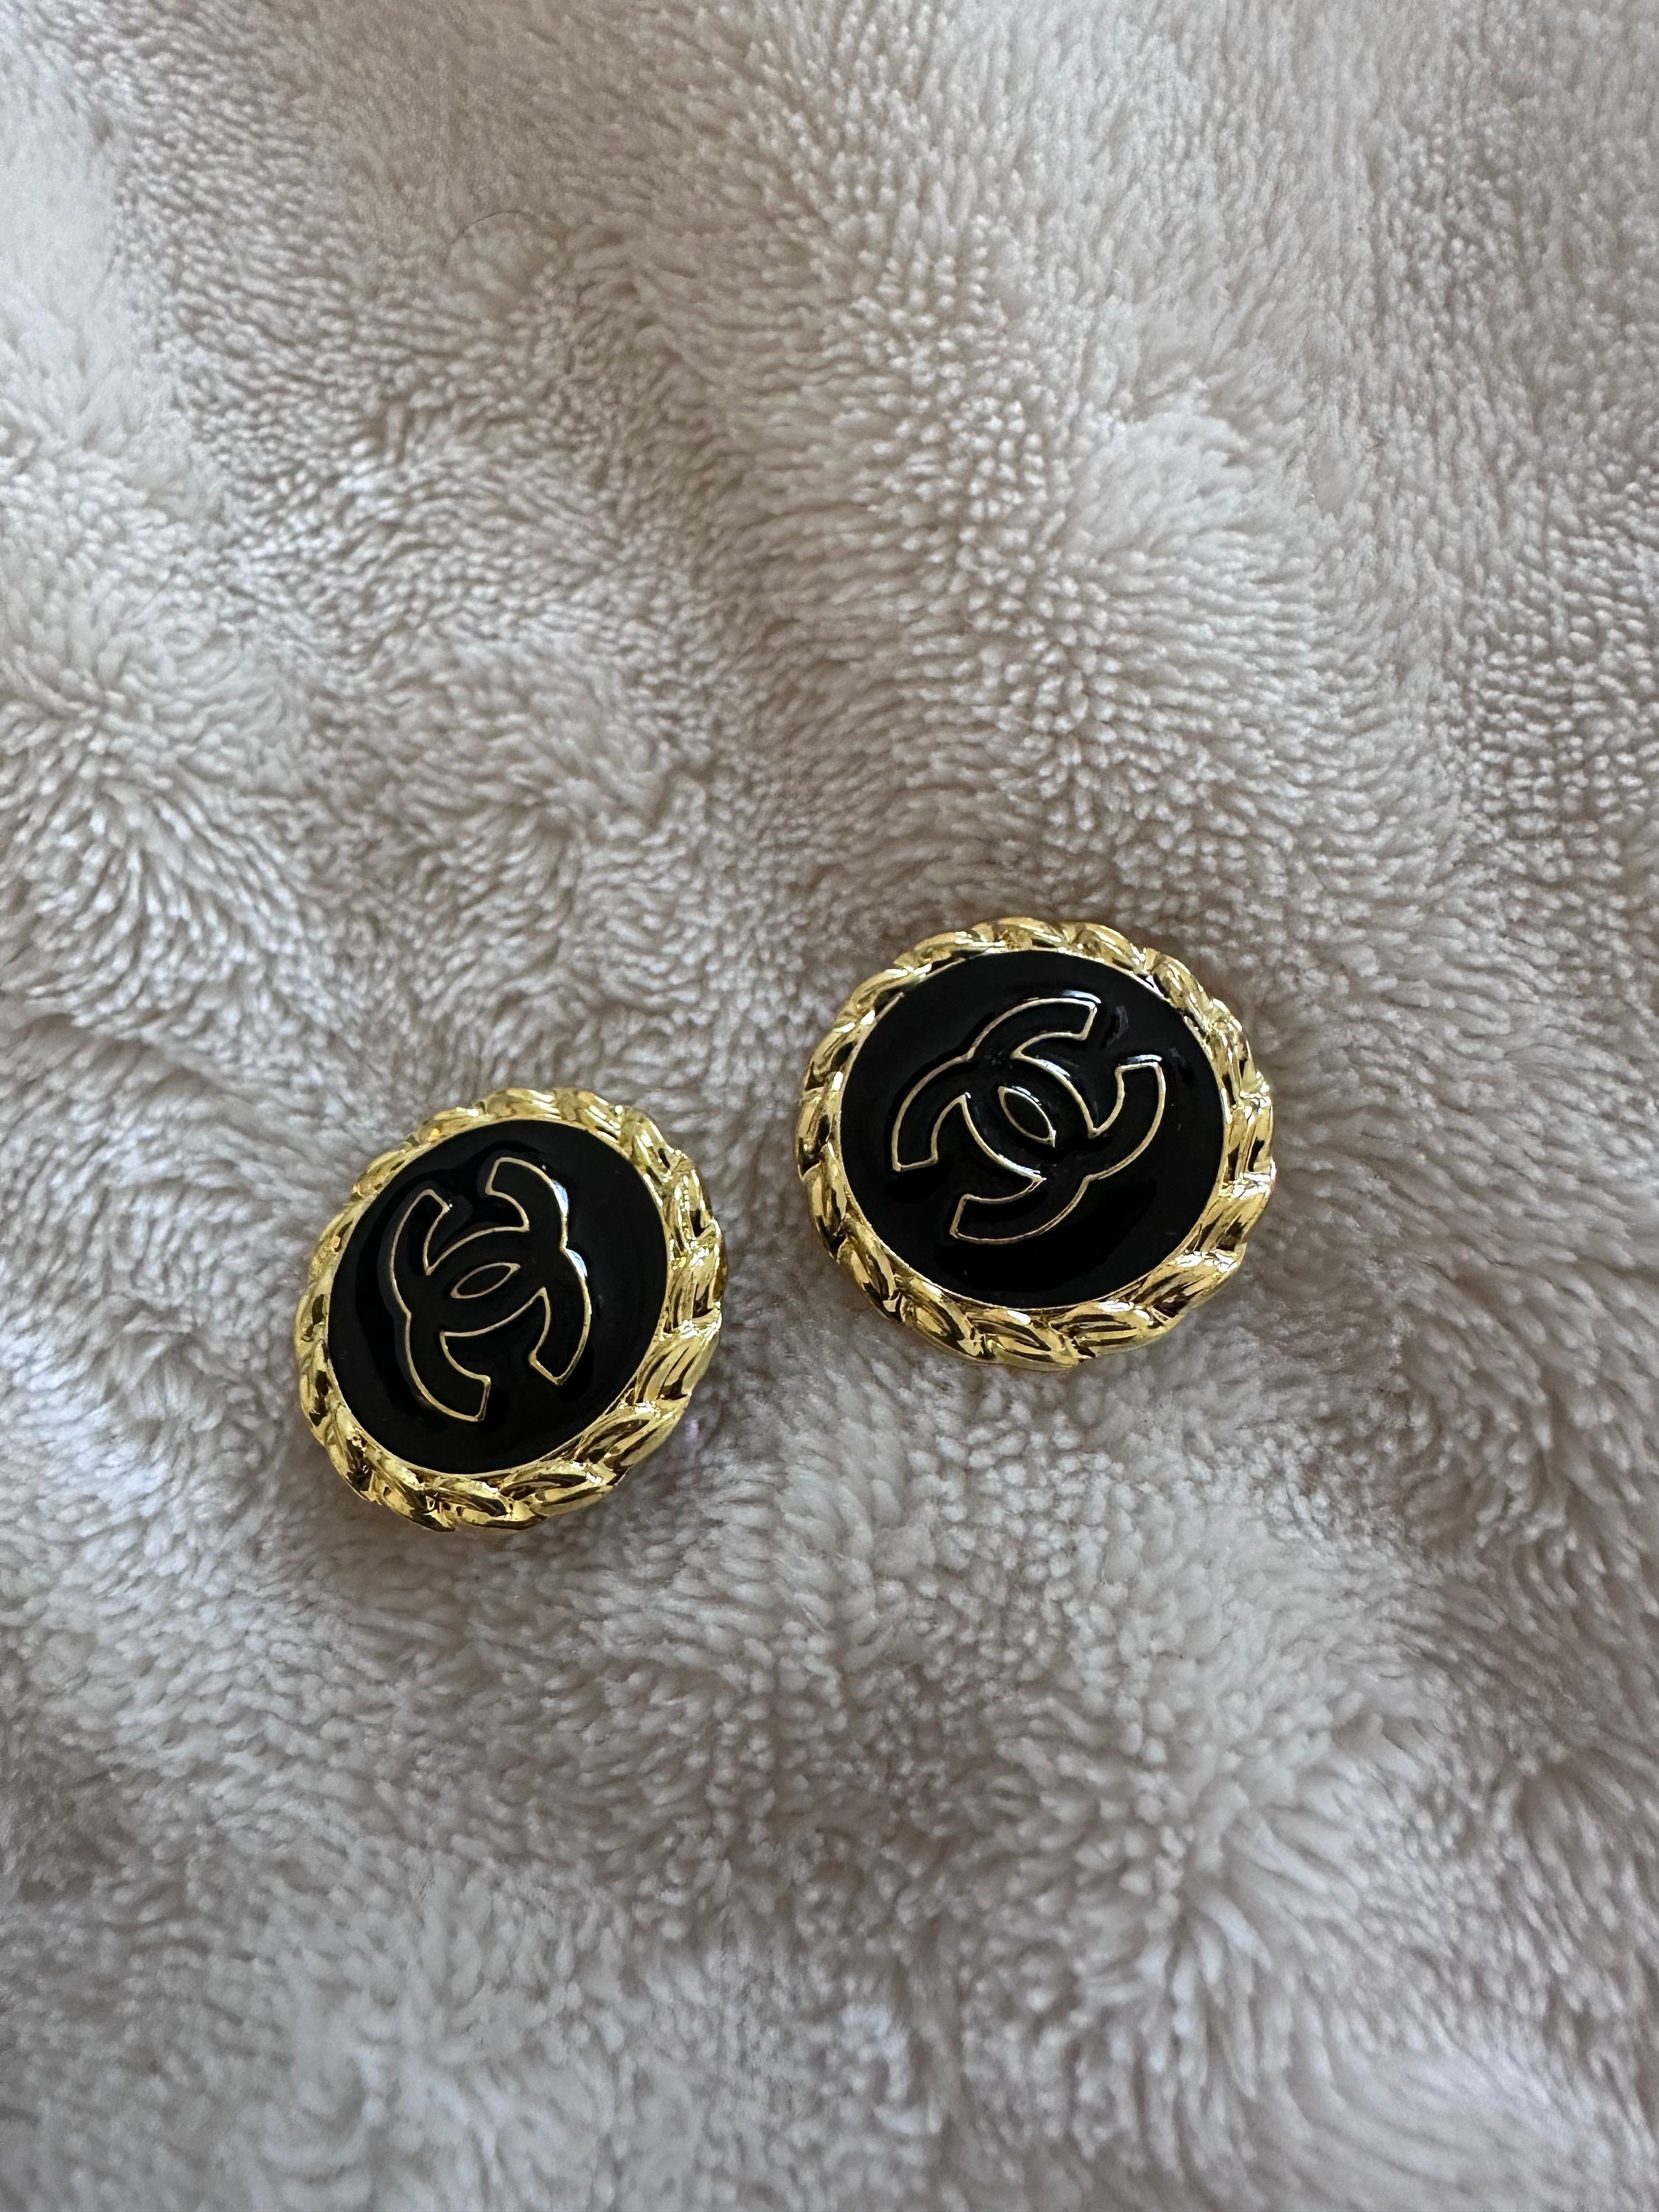 Chanel Buttons Black Gold 